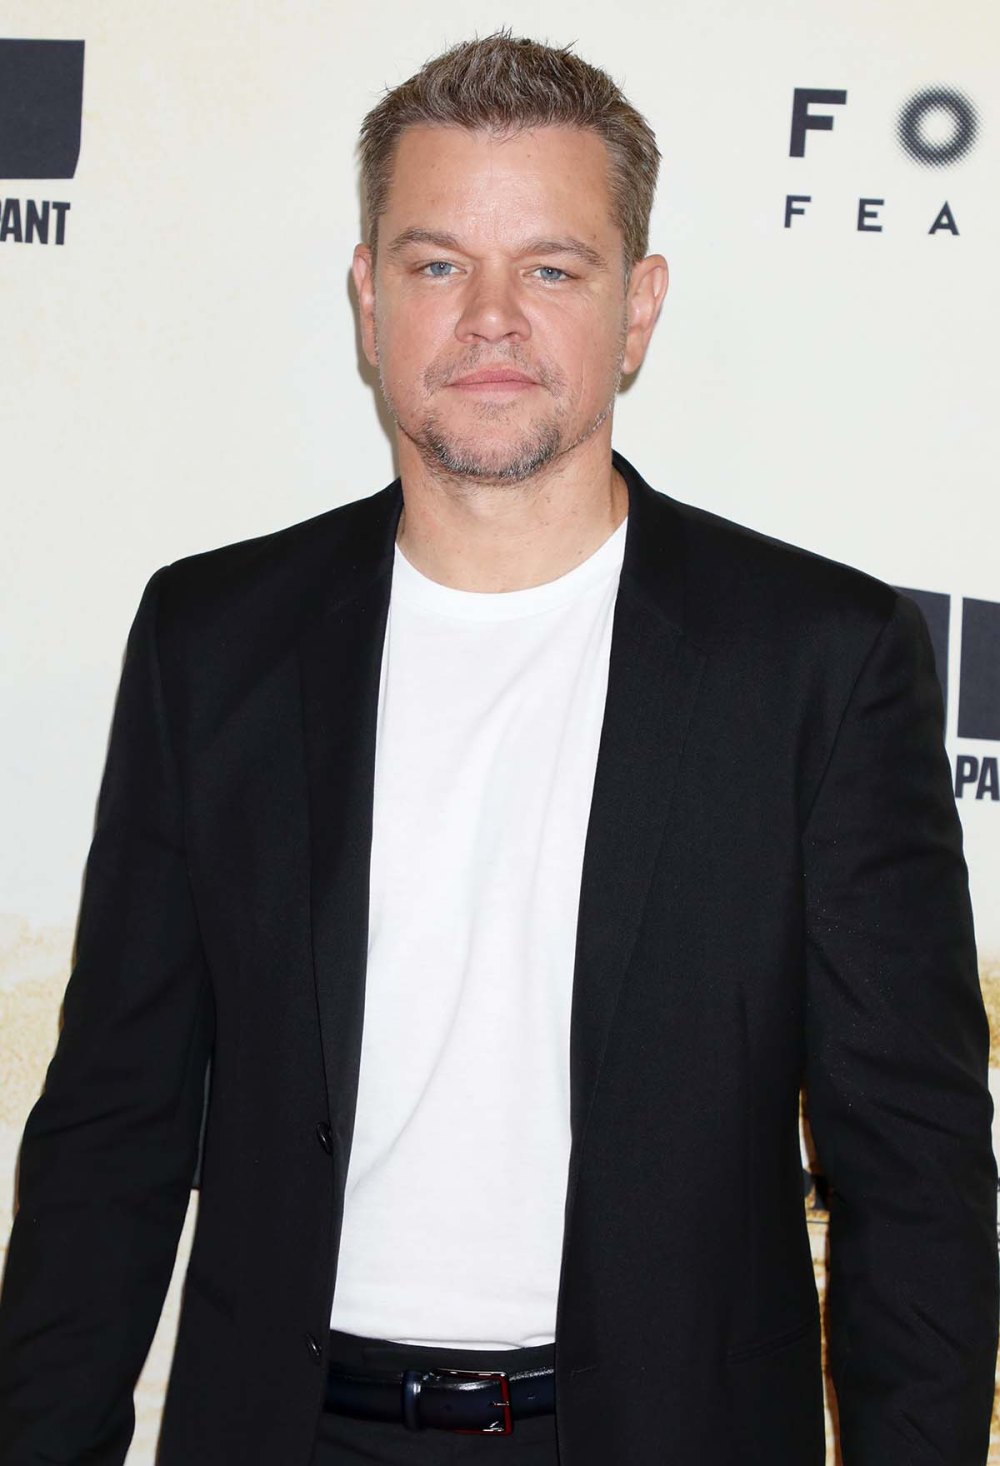 Matt Damon Insists Hes Never Used F Slur After Getting Backlash Past Comments